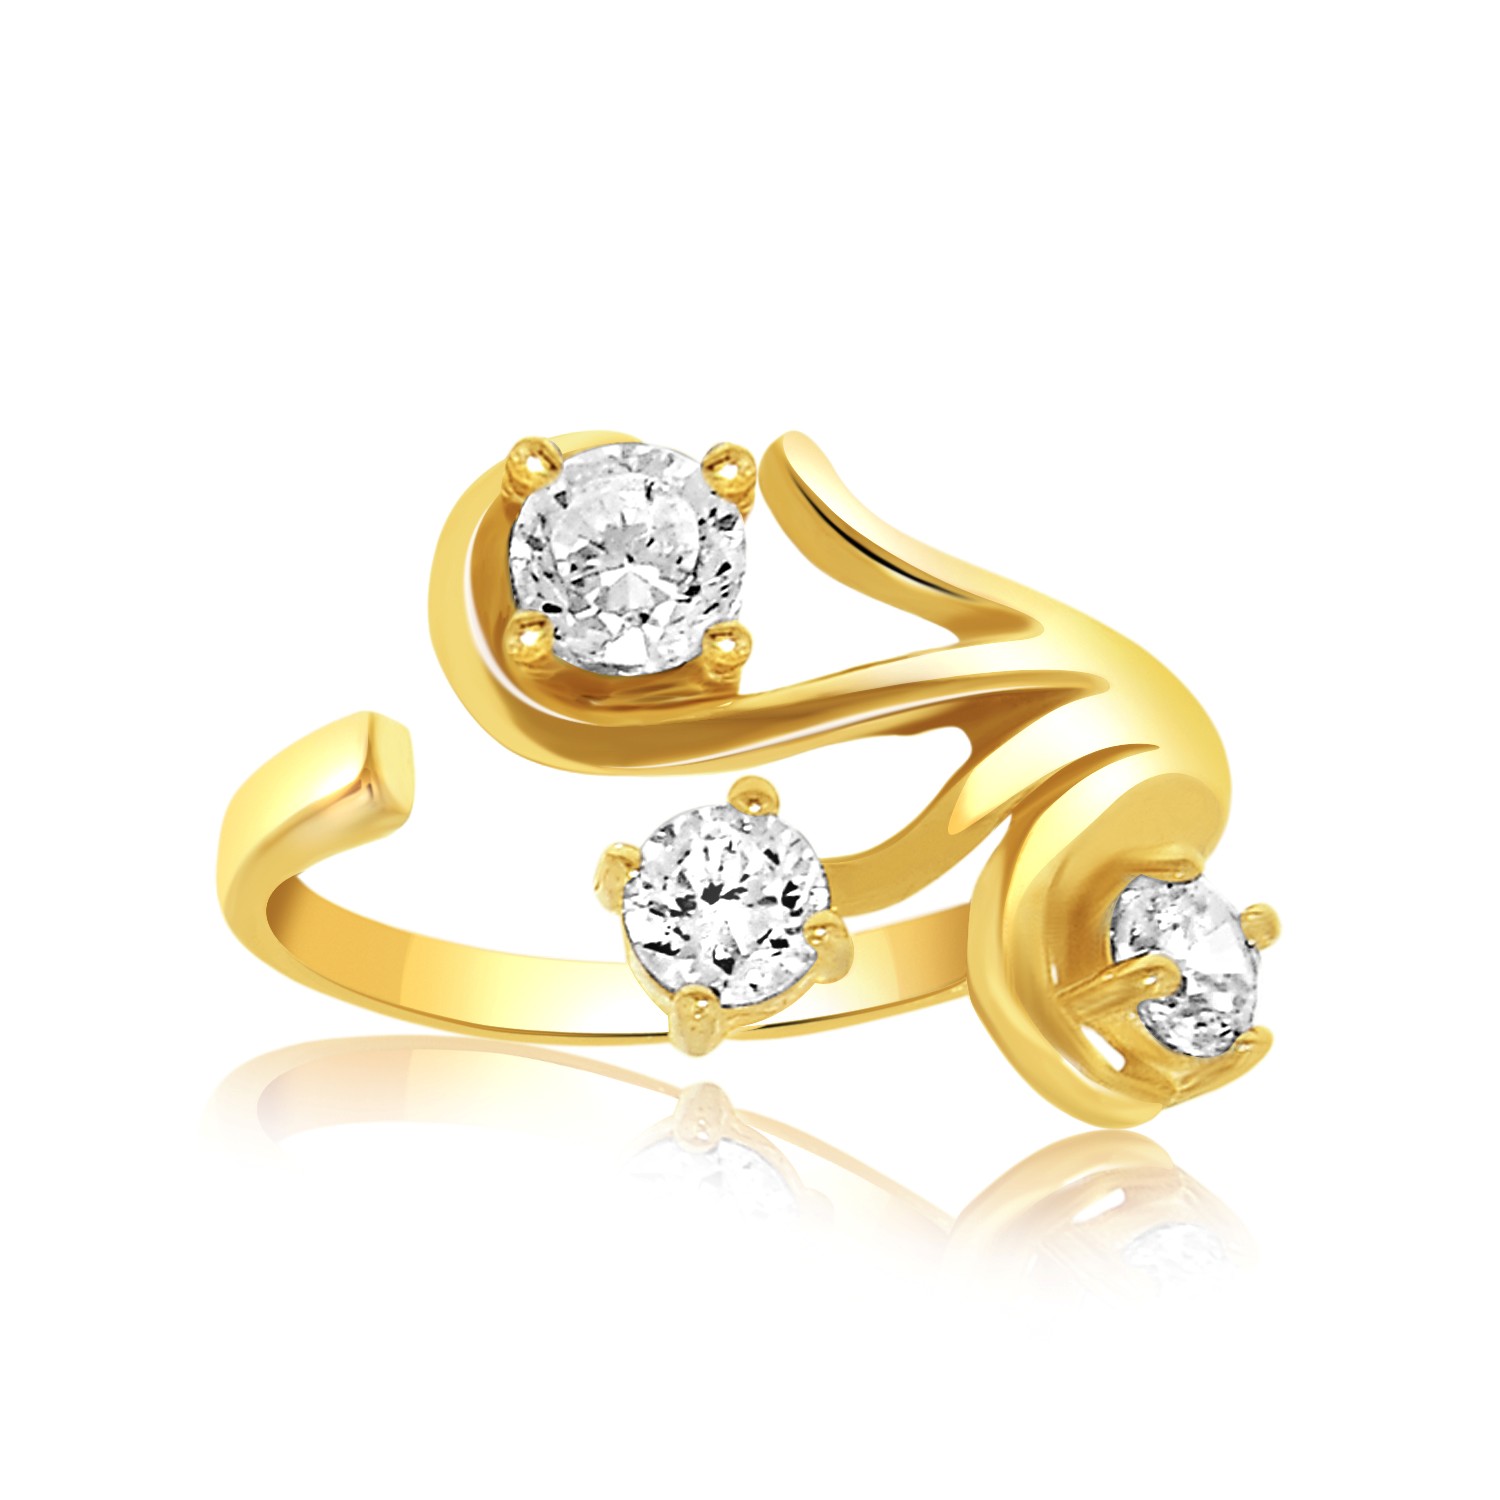 Fancy Toe Ring with Round Cubic Zirconia Accents in 14K Yellow Gold ...